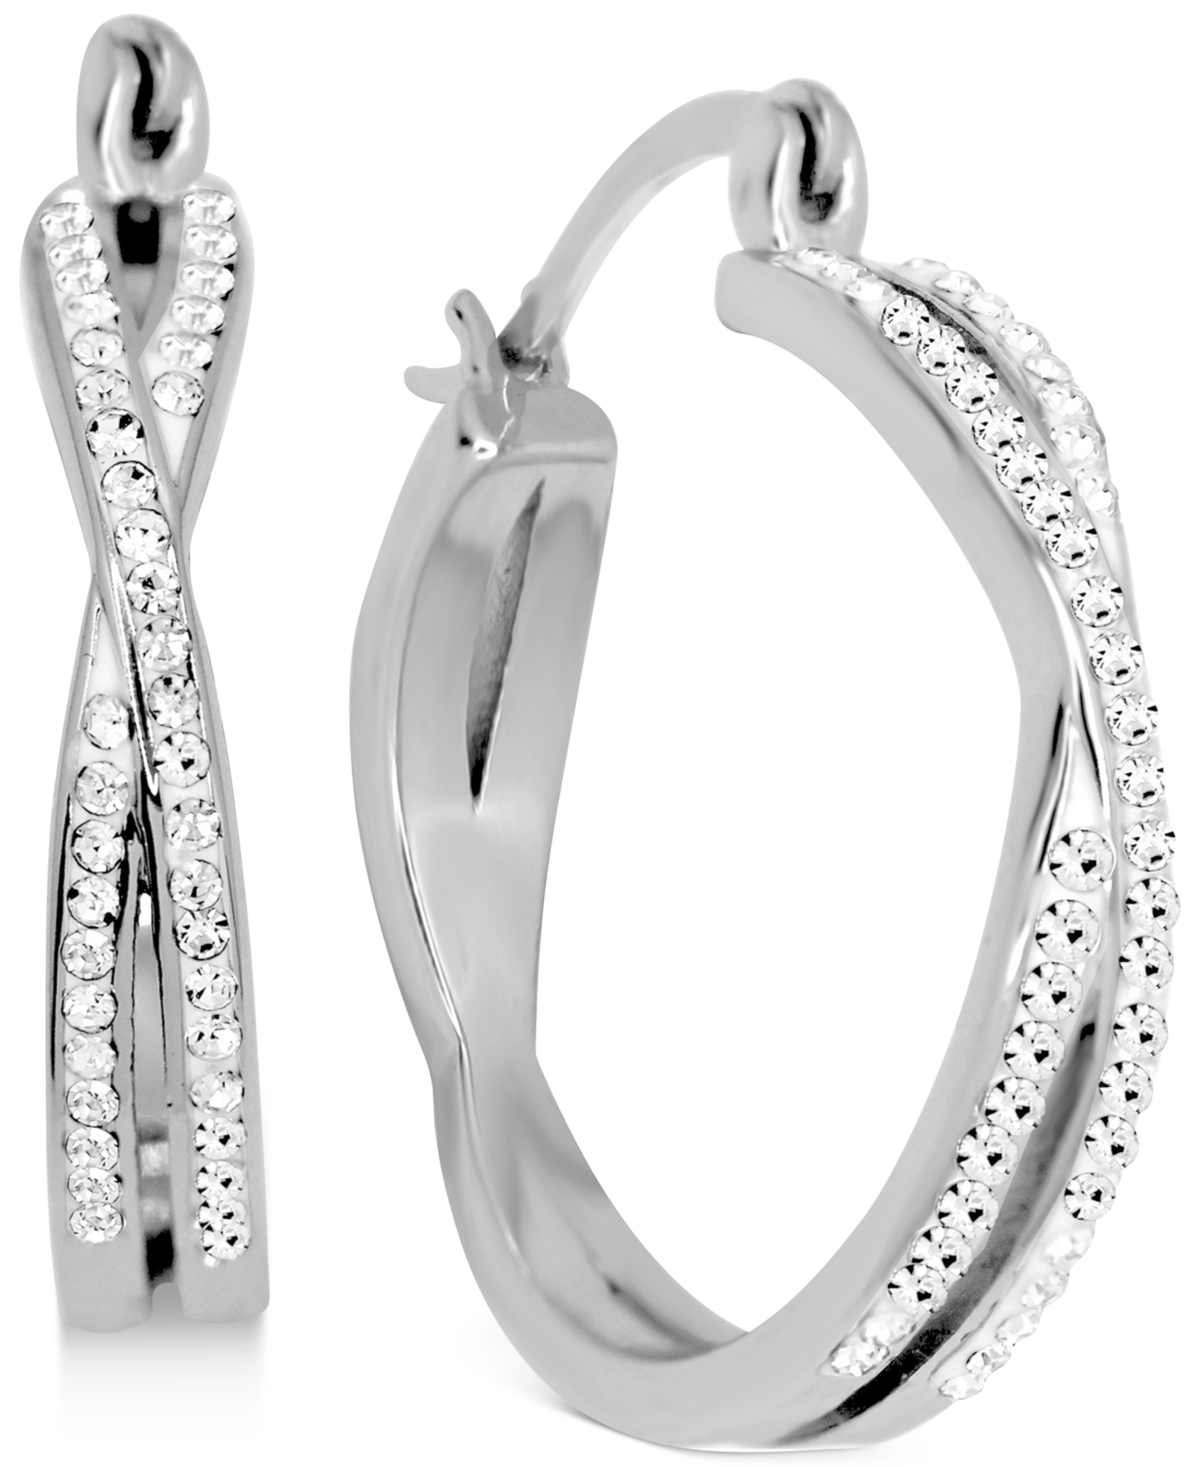 Crystal Small Crossover Hoop Earrings, 0.95" in Silver Plate or Gold Plate - Gold